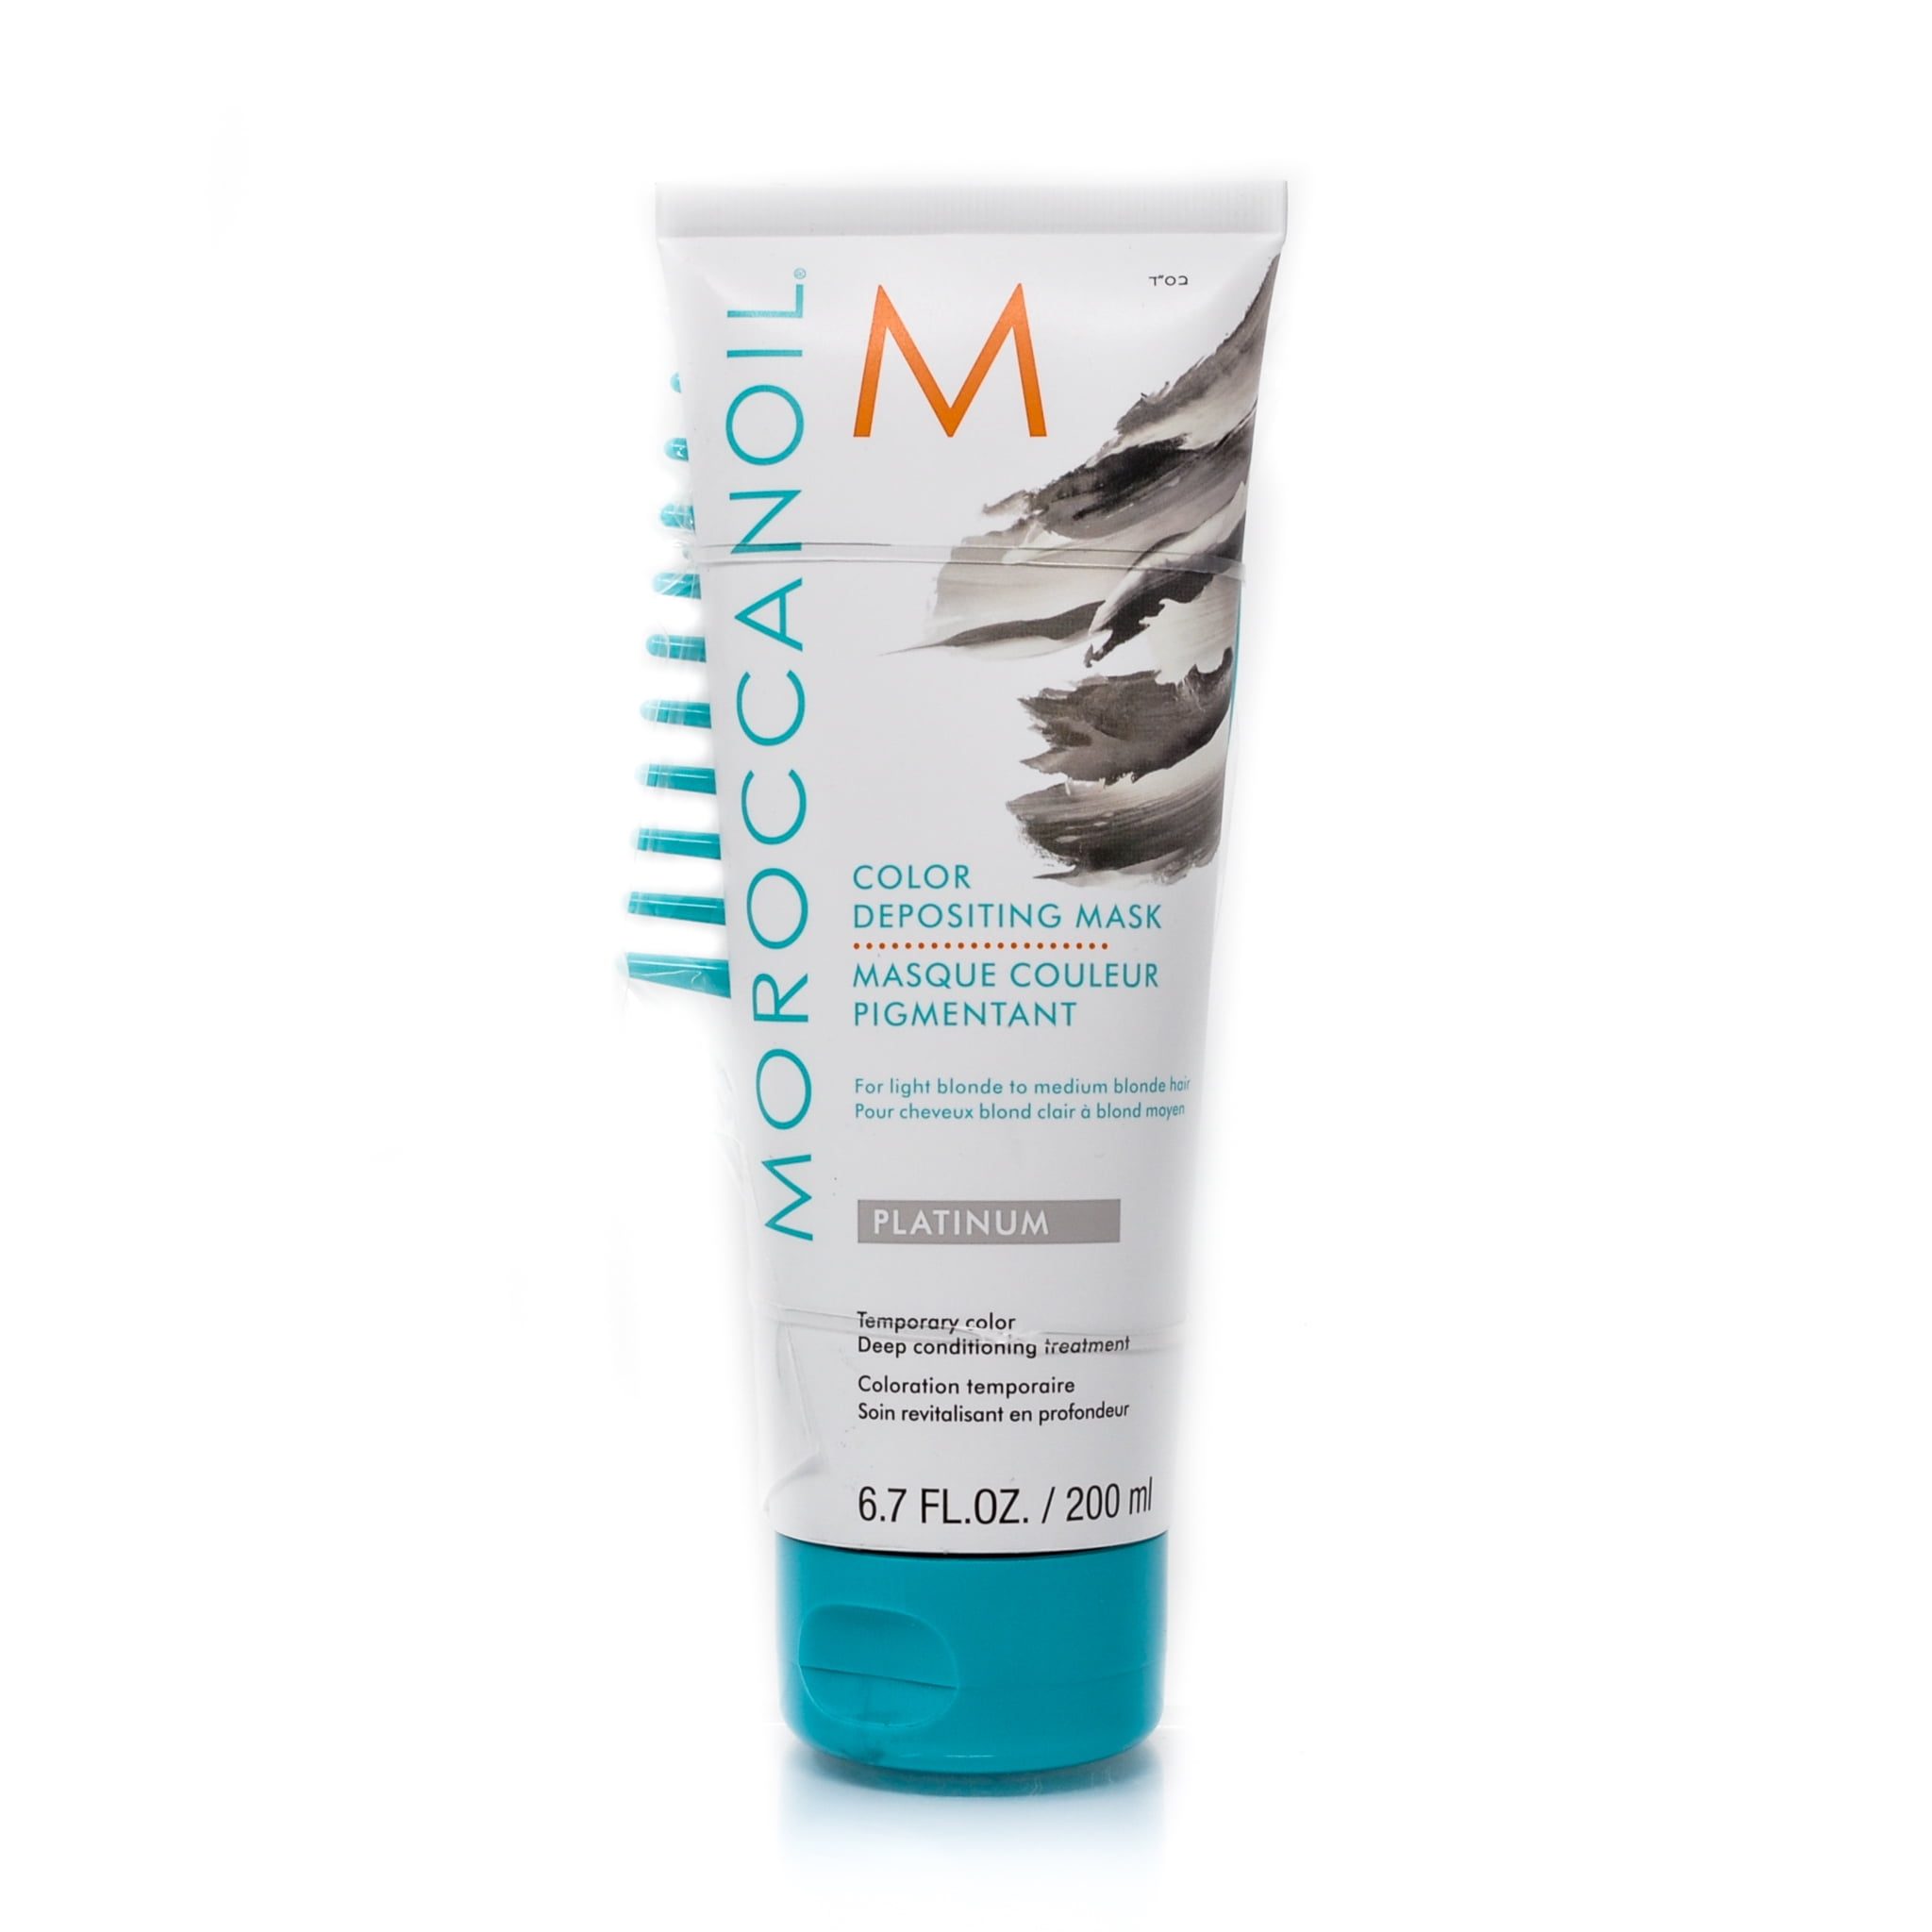 Moroccanoil Color Depositing Hair Mask with Comb 6.7oz/200ml - Walmart.com